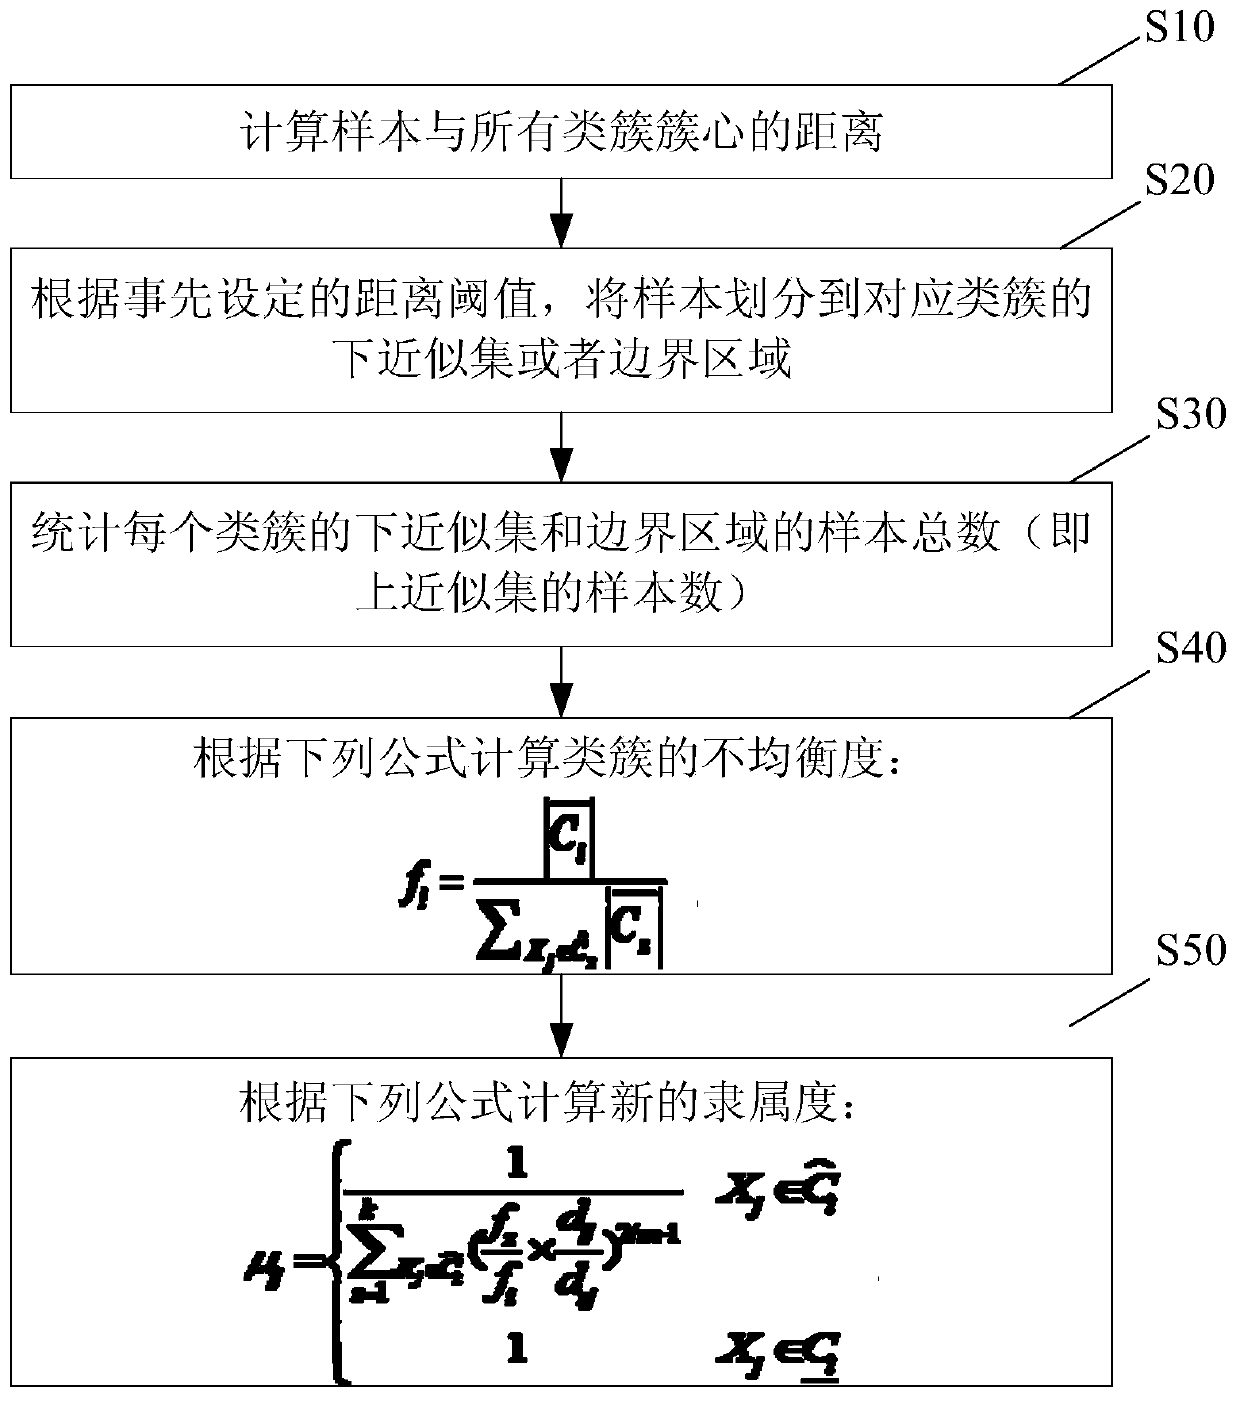 A transformer state evaluation clustering analysis method based on data imbalance measurement